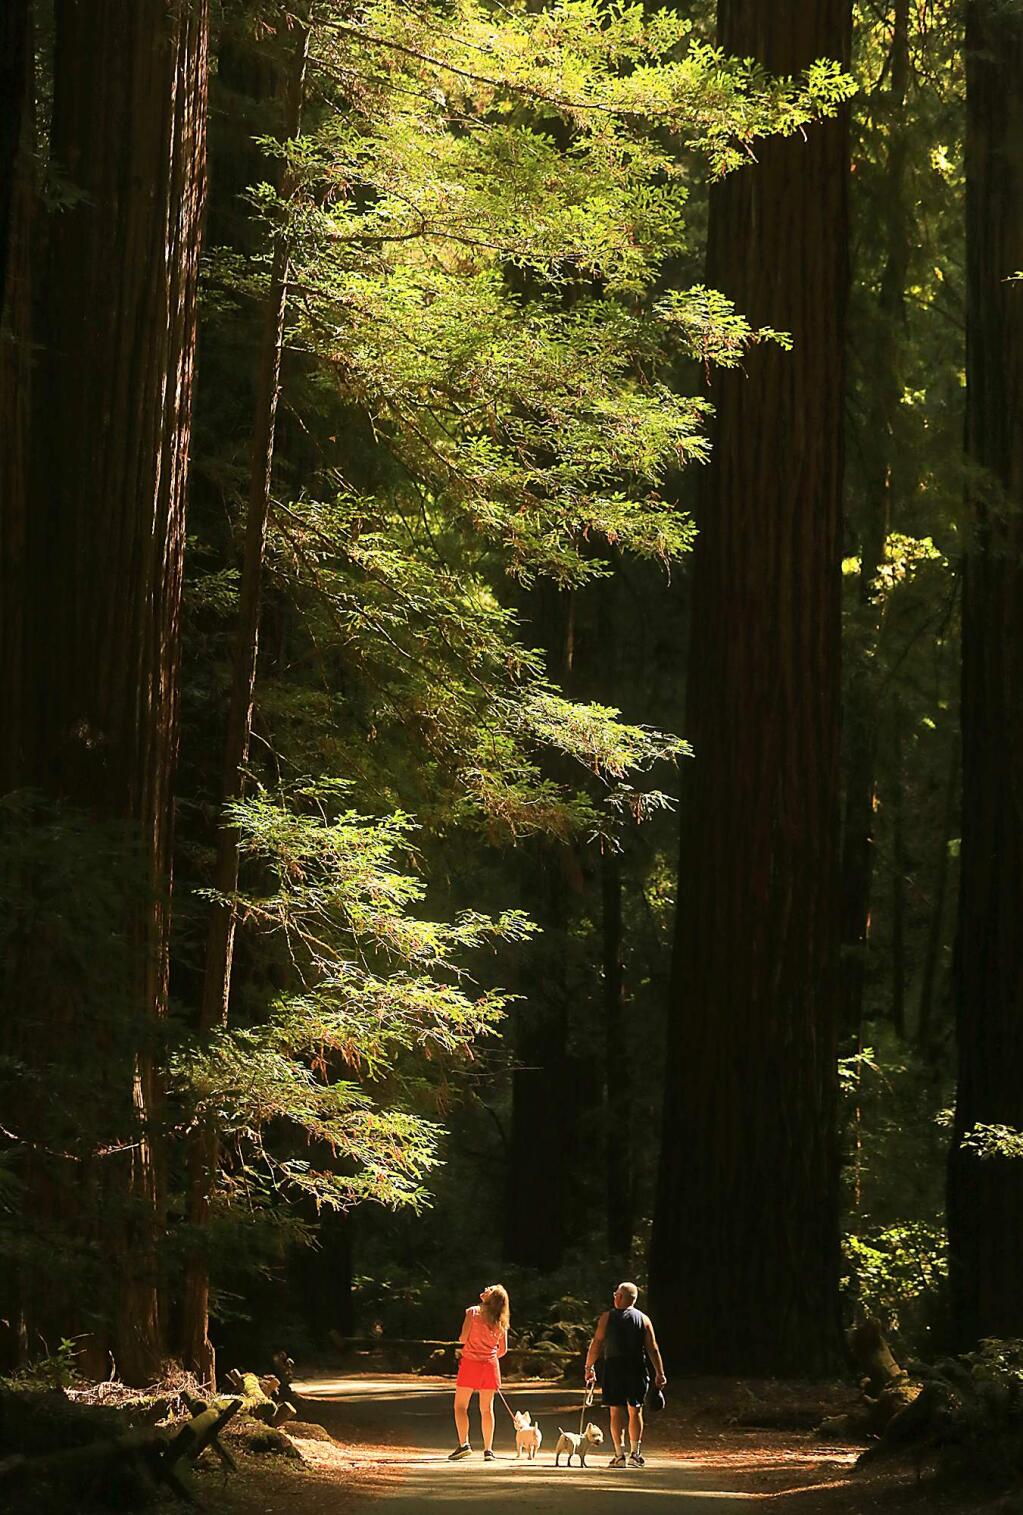 Sunlight filters through redwoods at Armstrong Redwoods State Natural Reserve in Guerneville, Tuesday Sept. 13, 2016. (Kent Porter / The Press Democrat) 2016